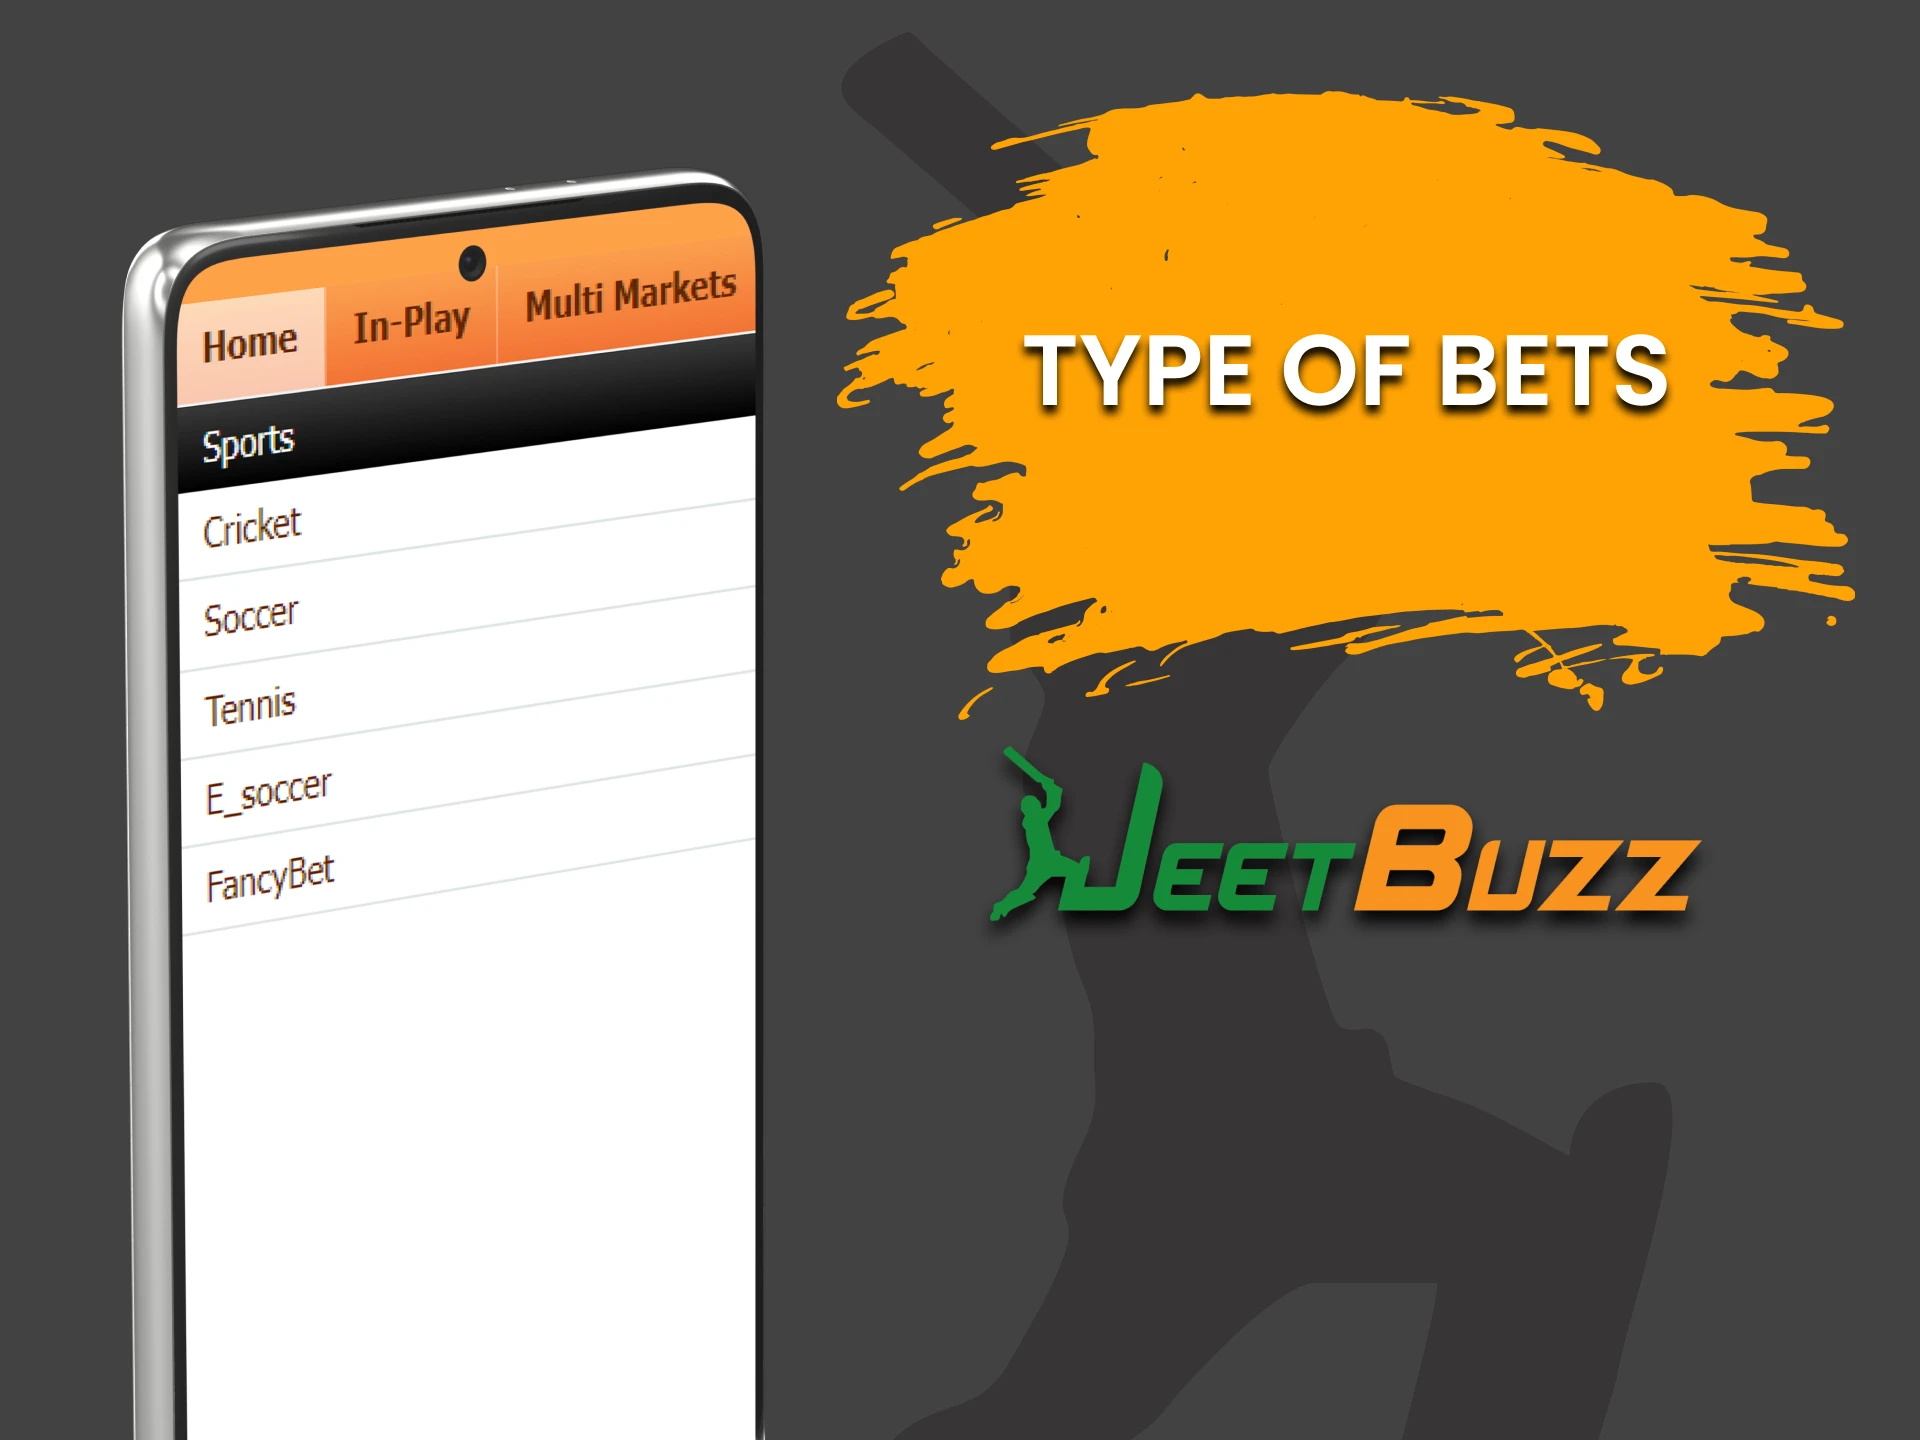 We will tell you about the types of bets in the JeetBuzz app.